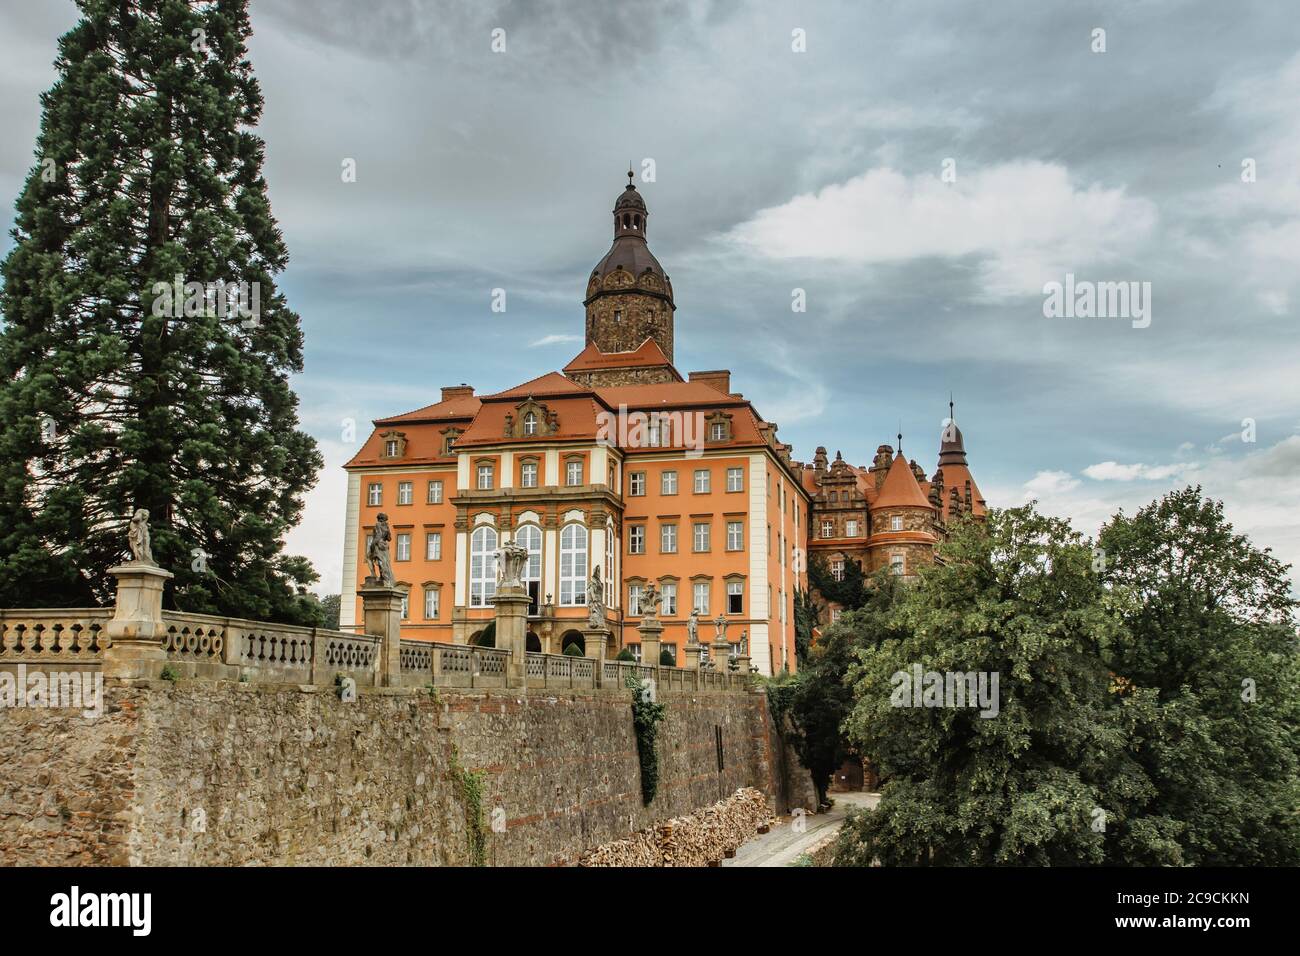 Ksiaz, Poland - July 26, 2020. An impressive view of the majestic Ksiaz Castle. The thrid biggest castle in Poland located on a rock cliff.Popular tou Stock Photo